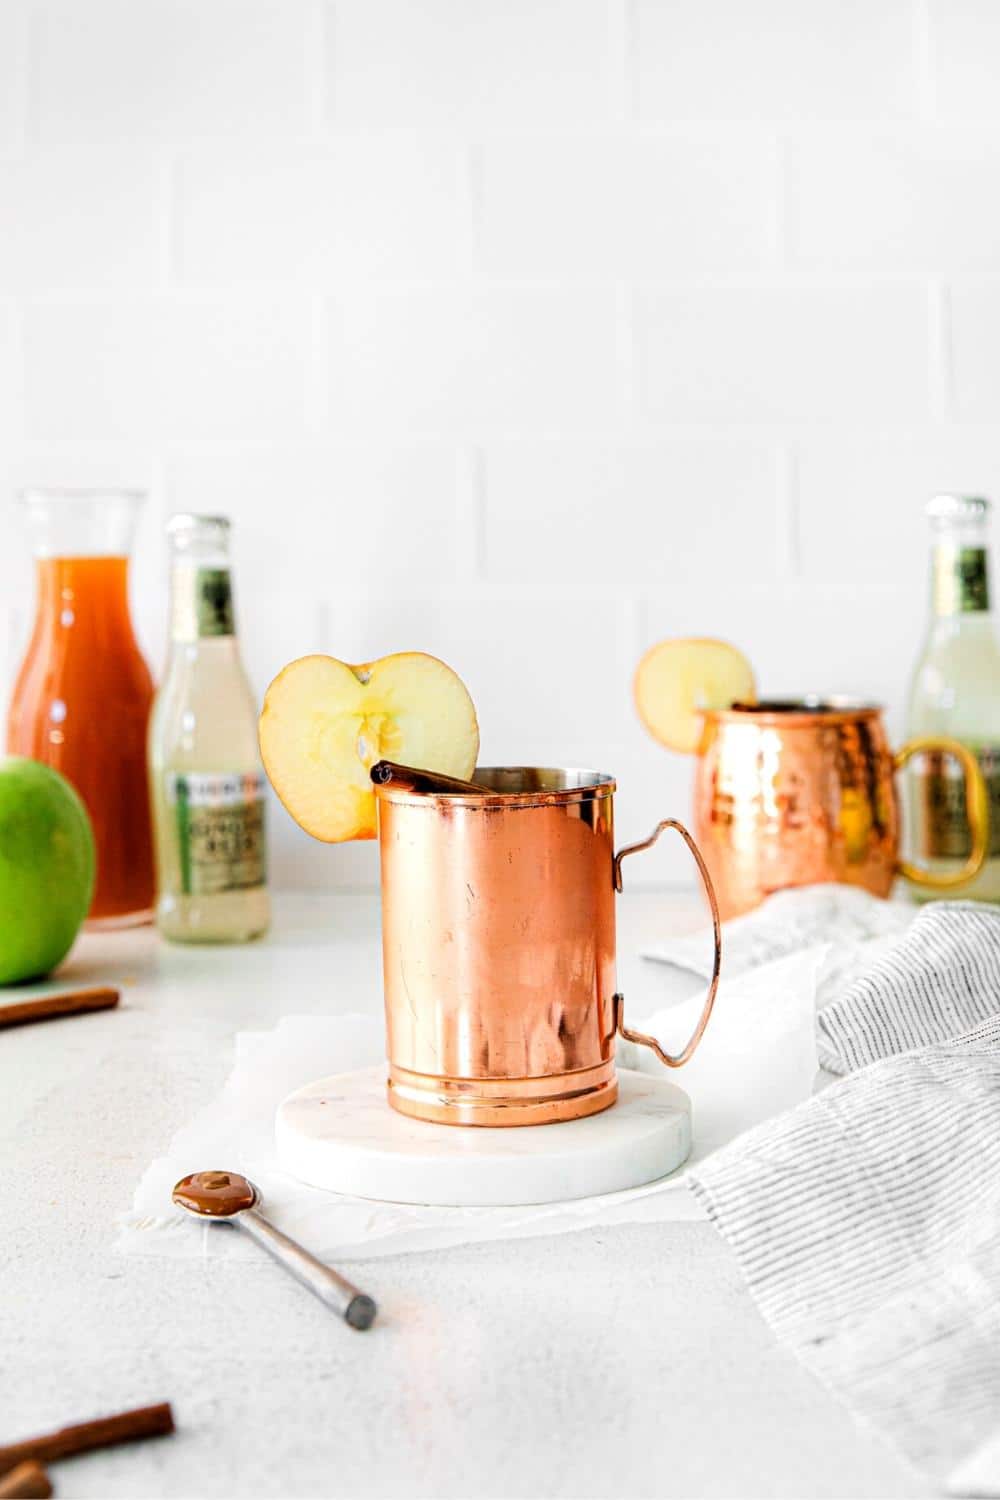 A Moscow Mule Drink garnished with an apple slice and cinnamon stick, and drizzled with salted caramel sauce.